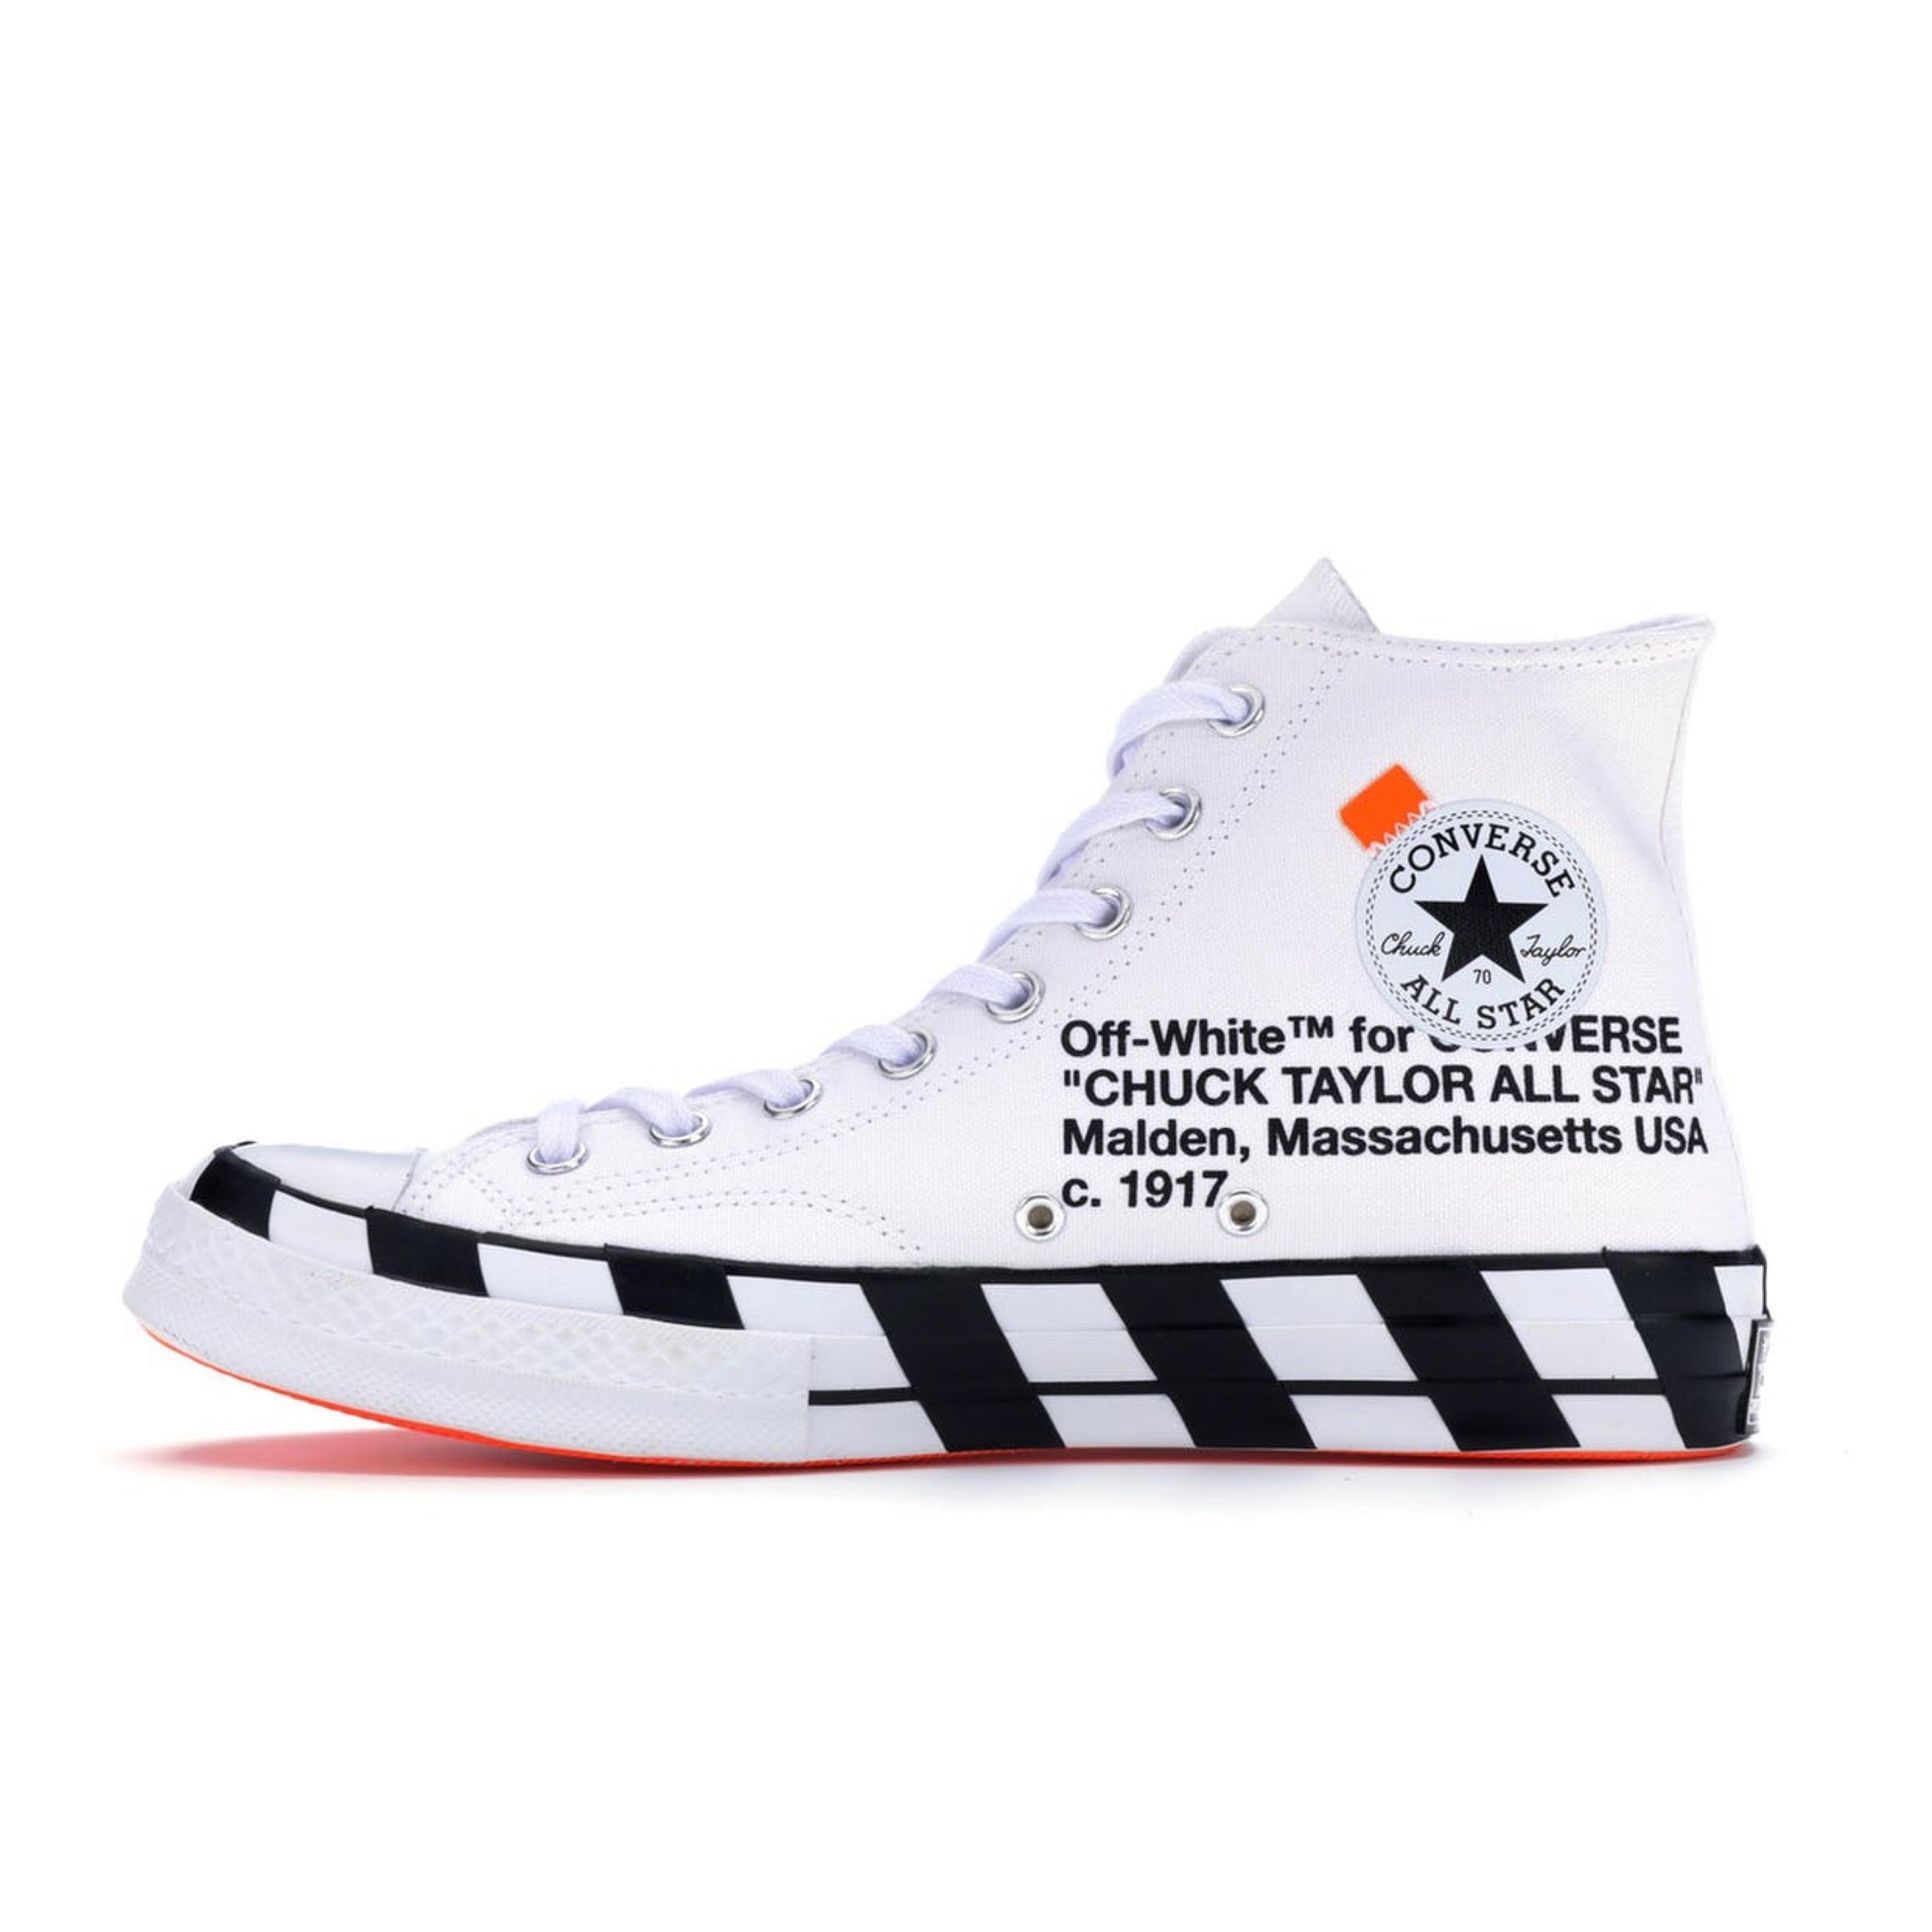 Off-Whiteoff-white converse chuck taylor 70s ct70